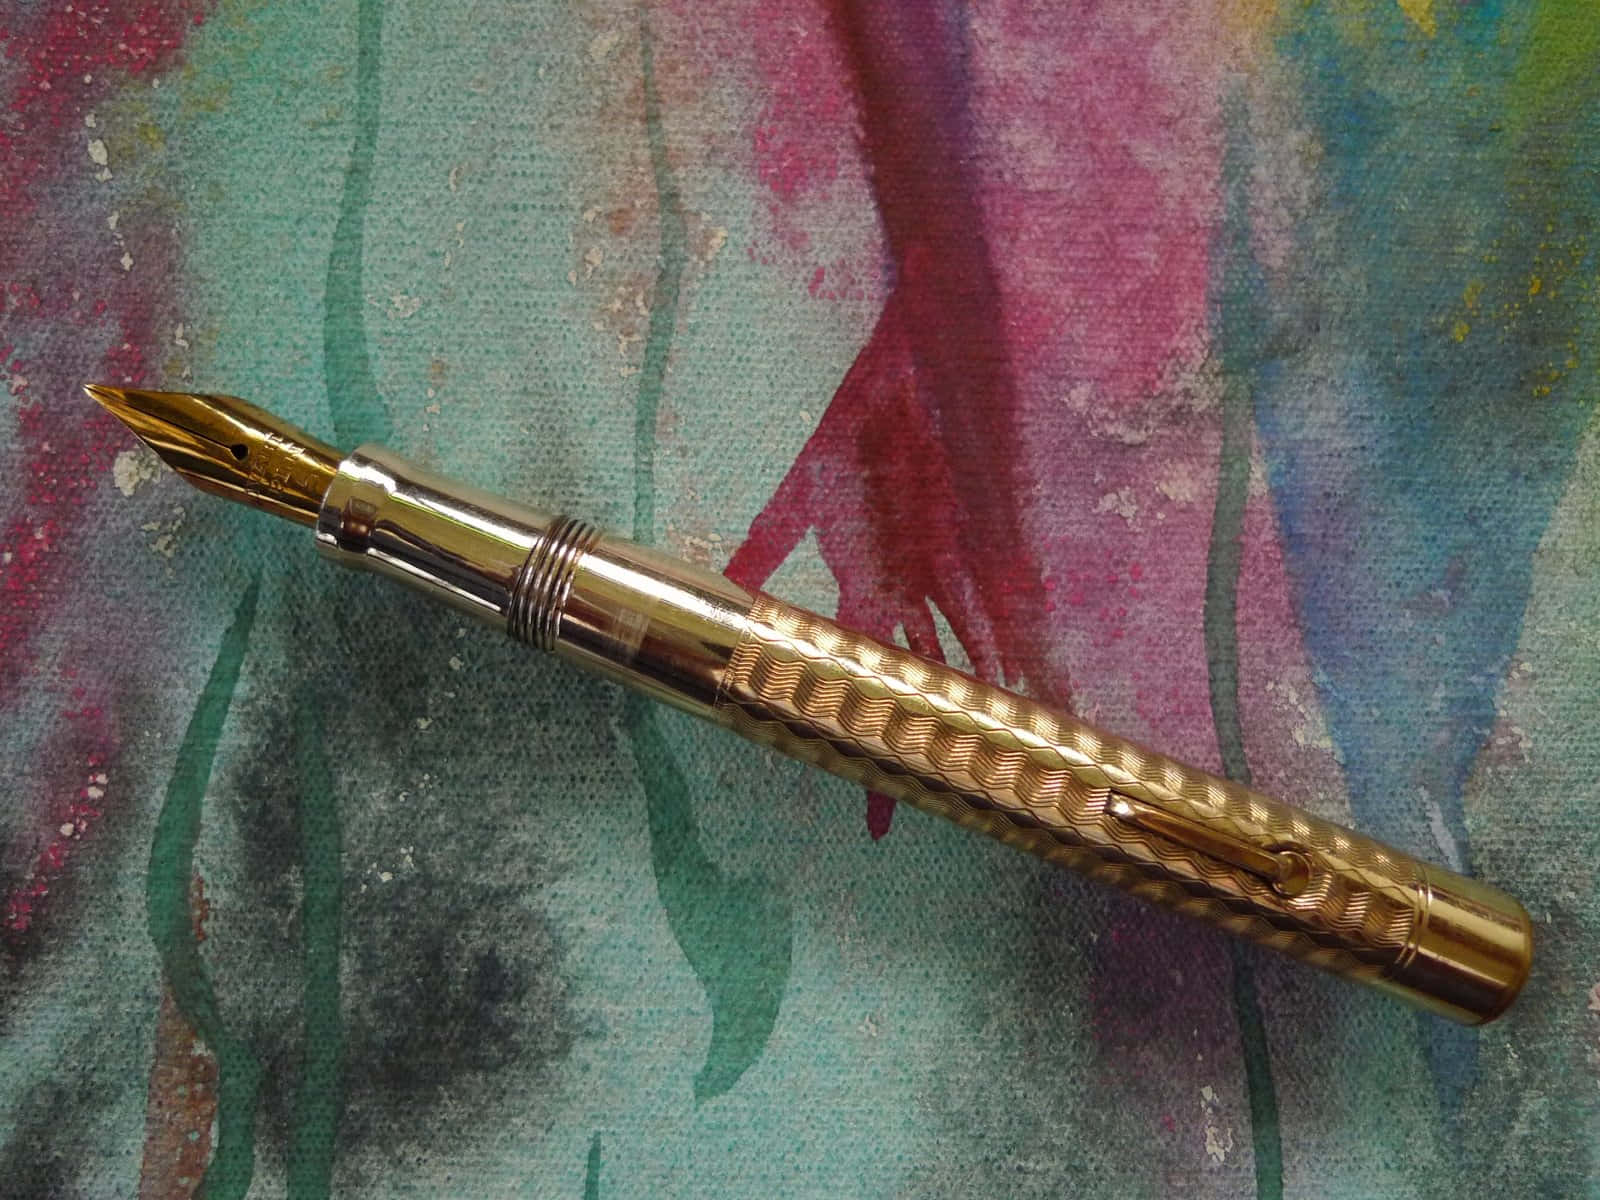 A Gold Pen On A Colorful Background